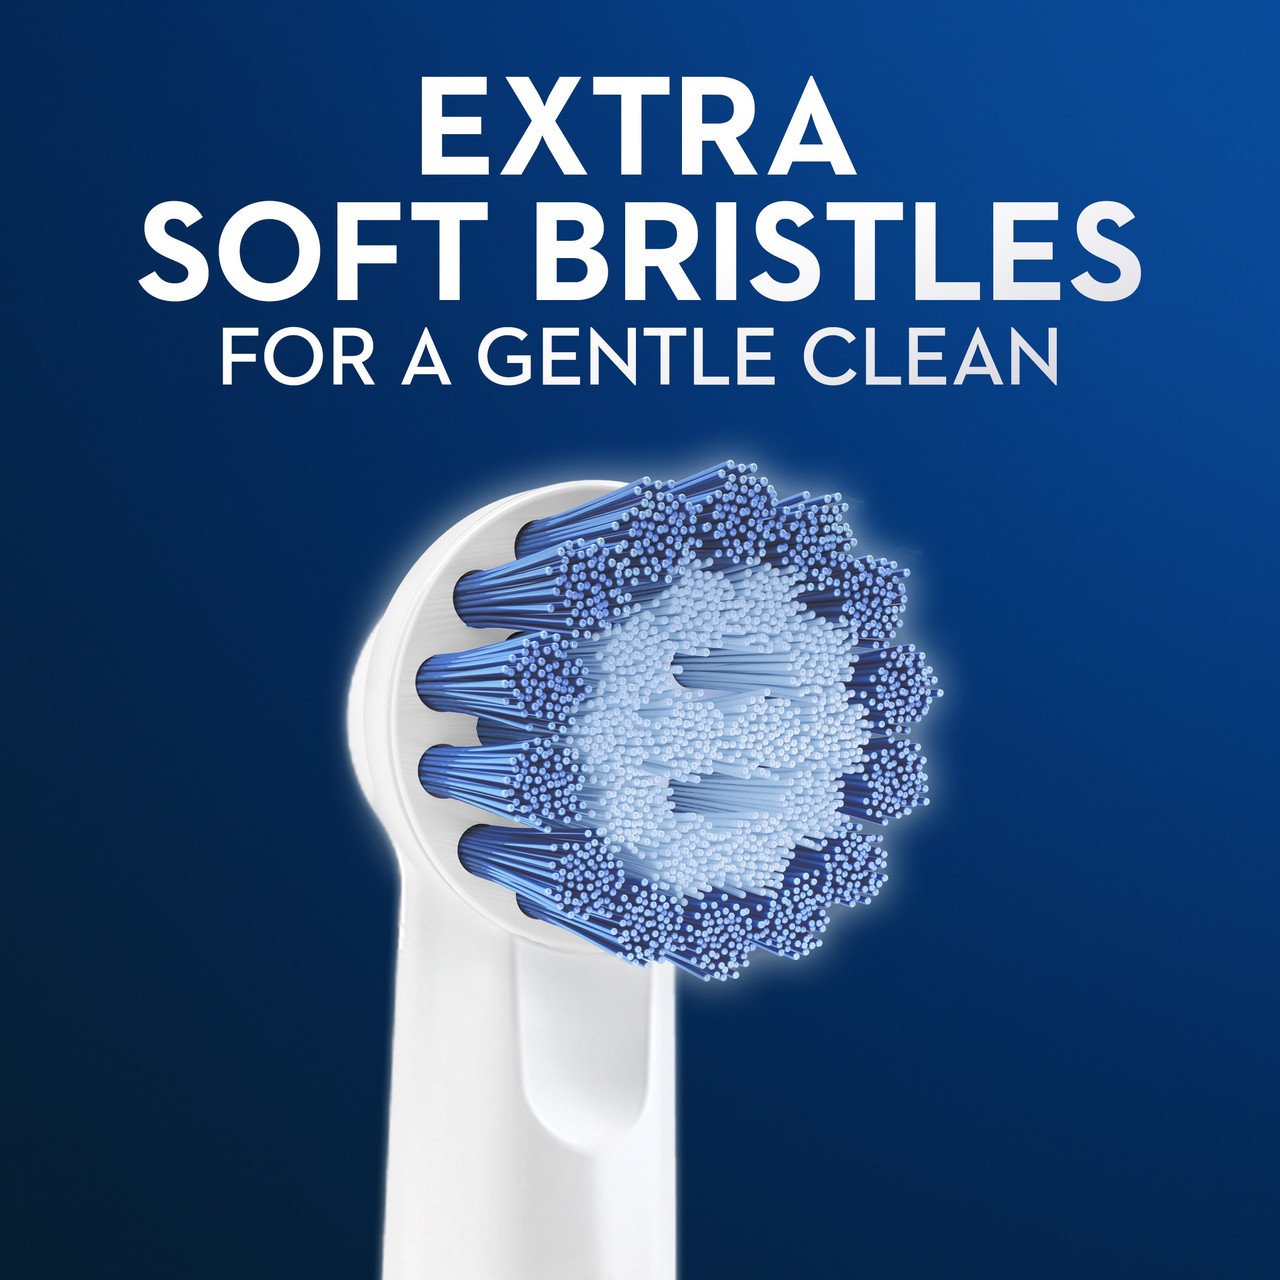 Oral B Sensitive Gum Care Brush Heads: Gentle Cleaning